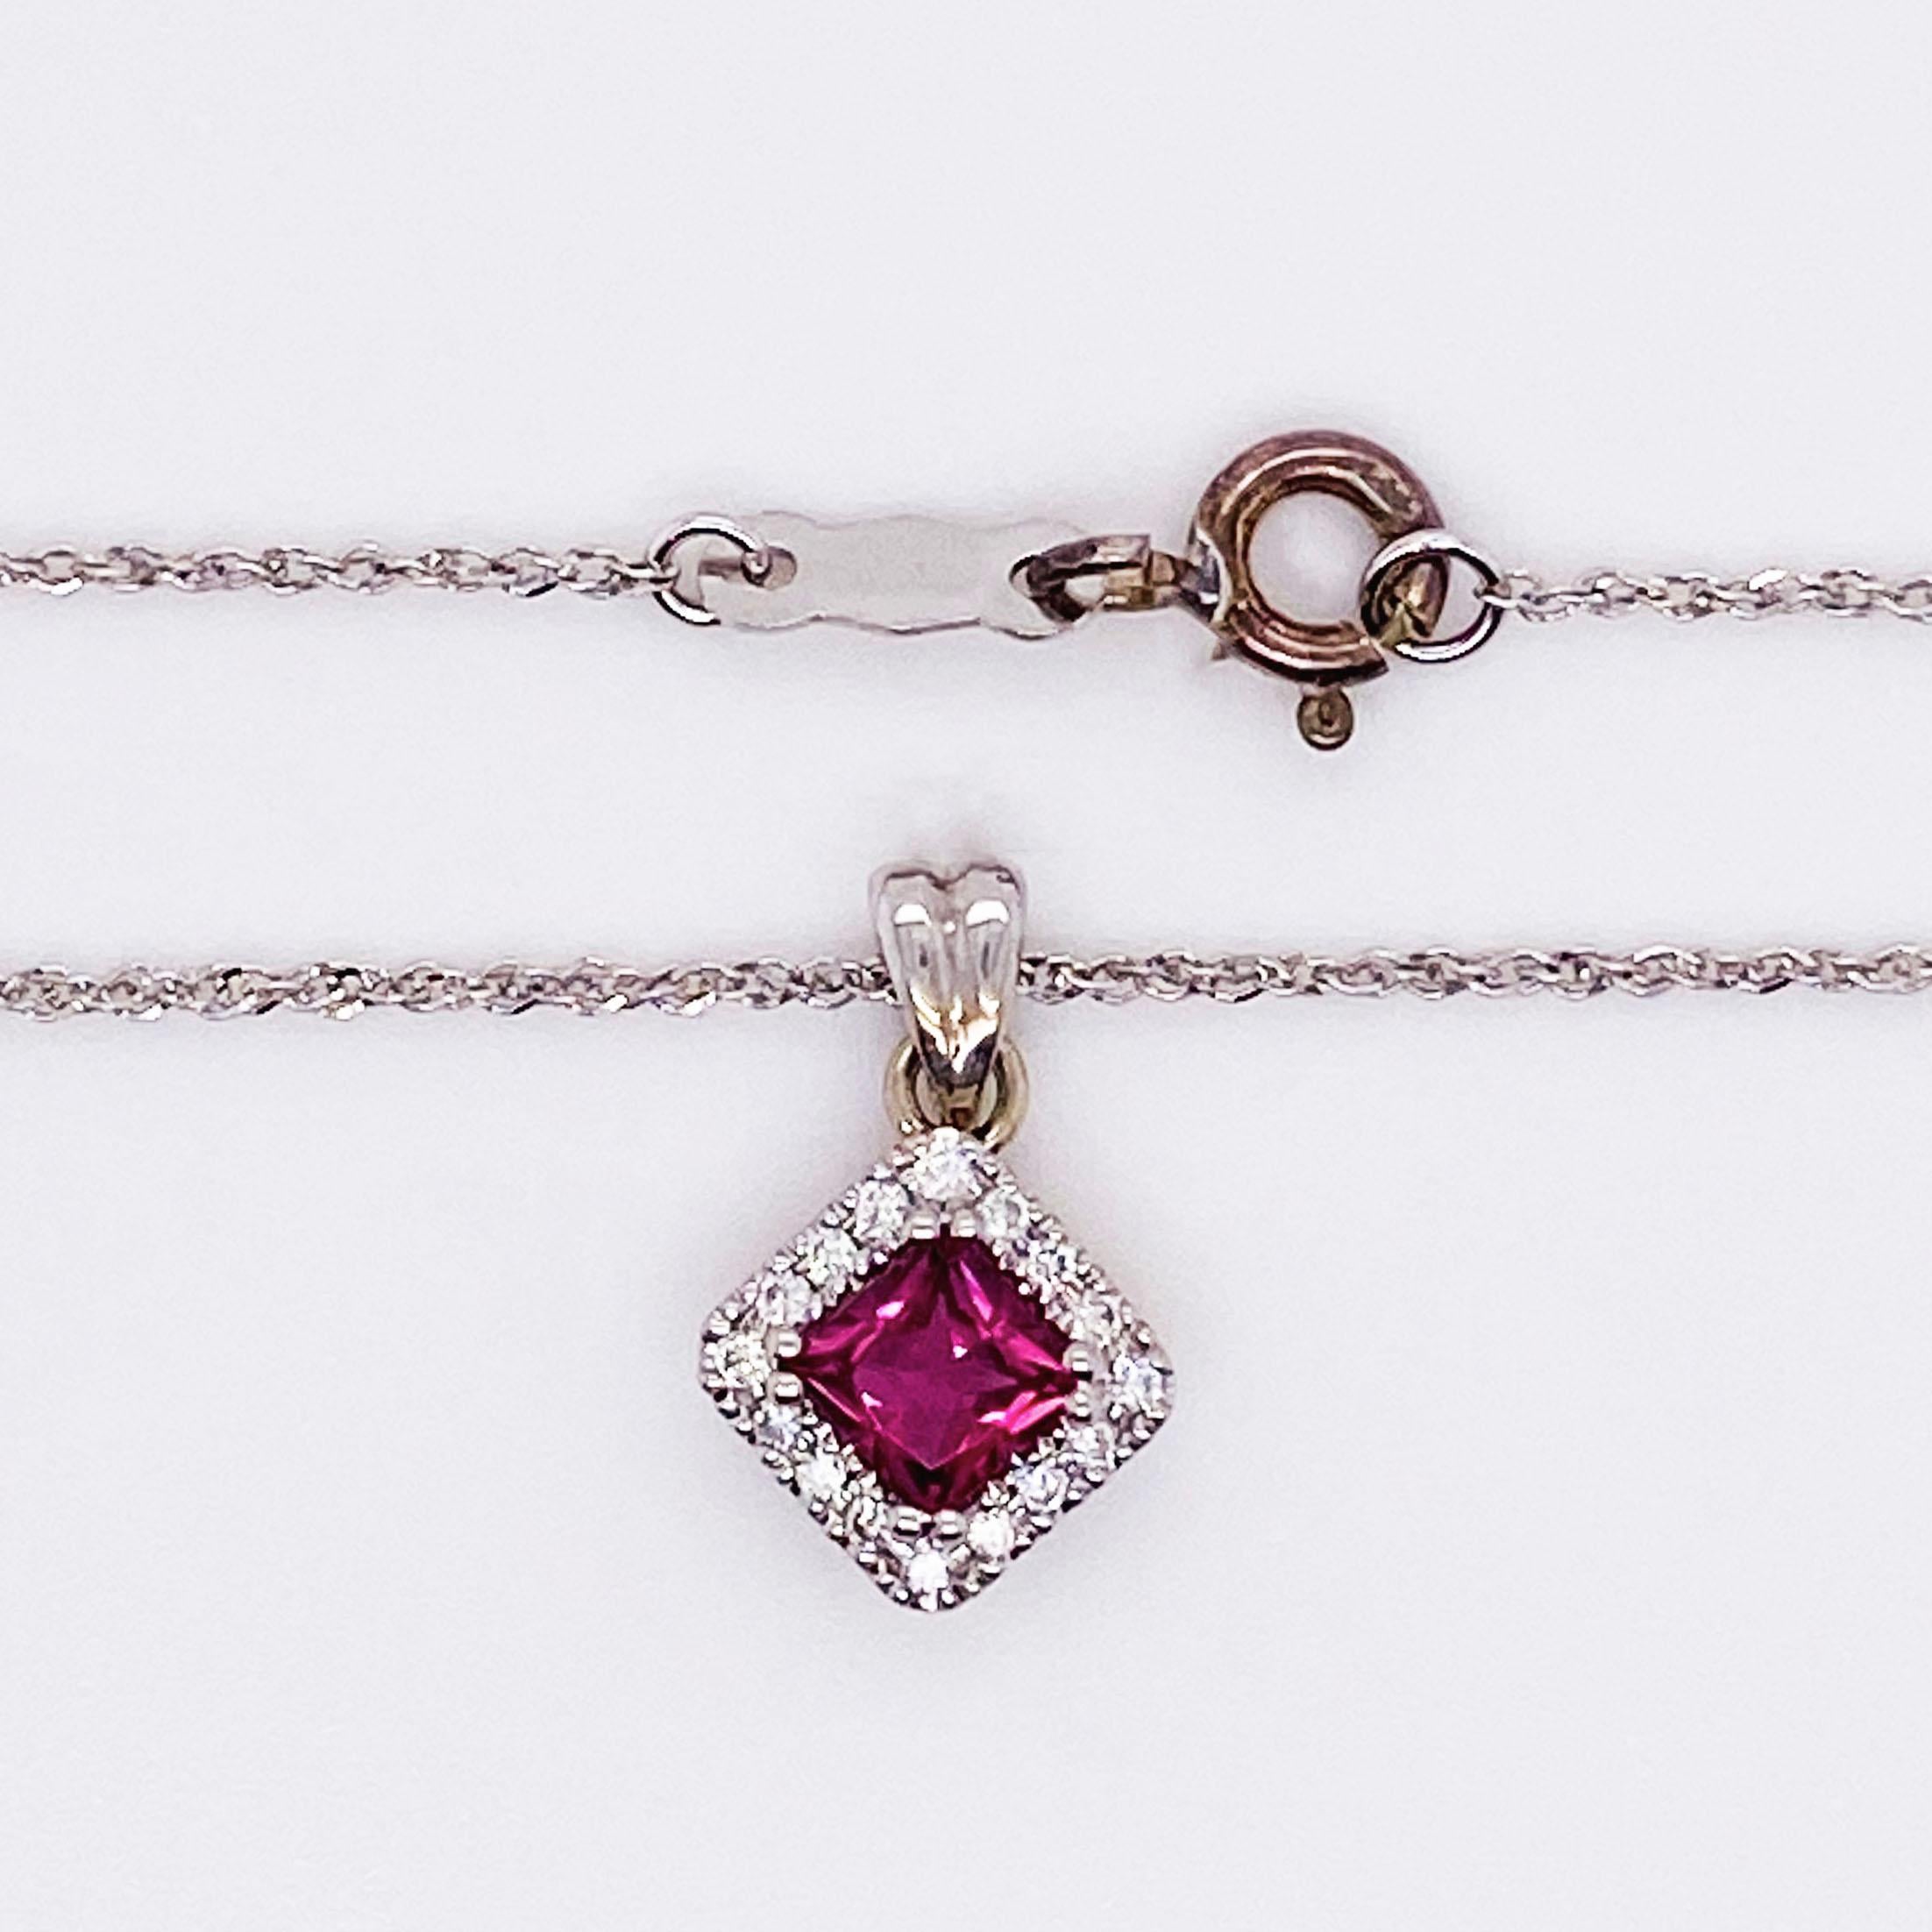 Adorable pink tourmaline and diamond halo pendant, the perfect gift for any October birthday or anniversary! The sweet pink tourmaline pendant has a princess cut, or square, genuine pink tourmaline gemstone set in four prongs with a bright white